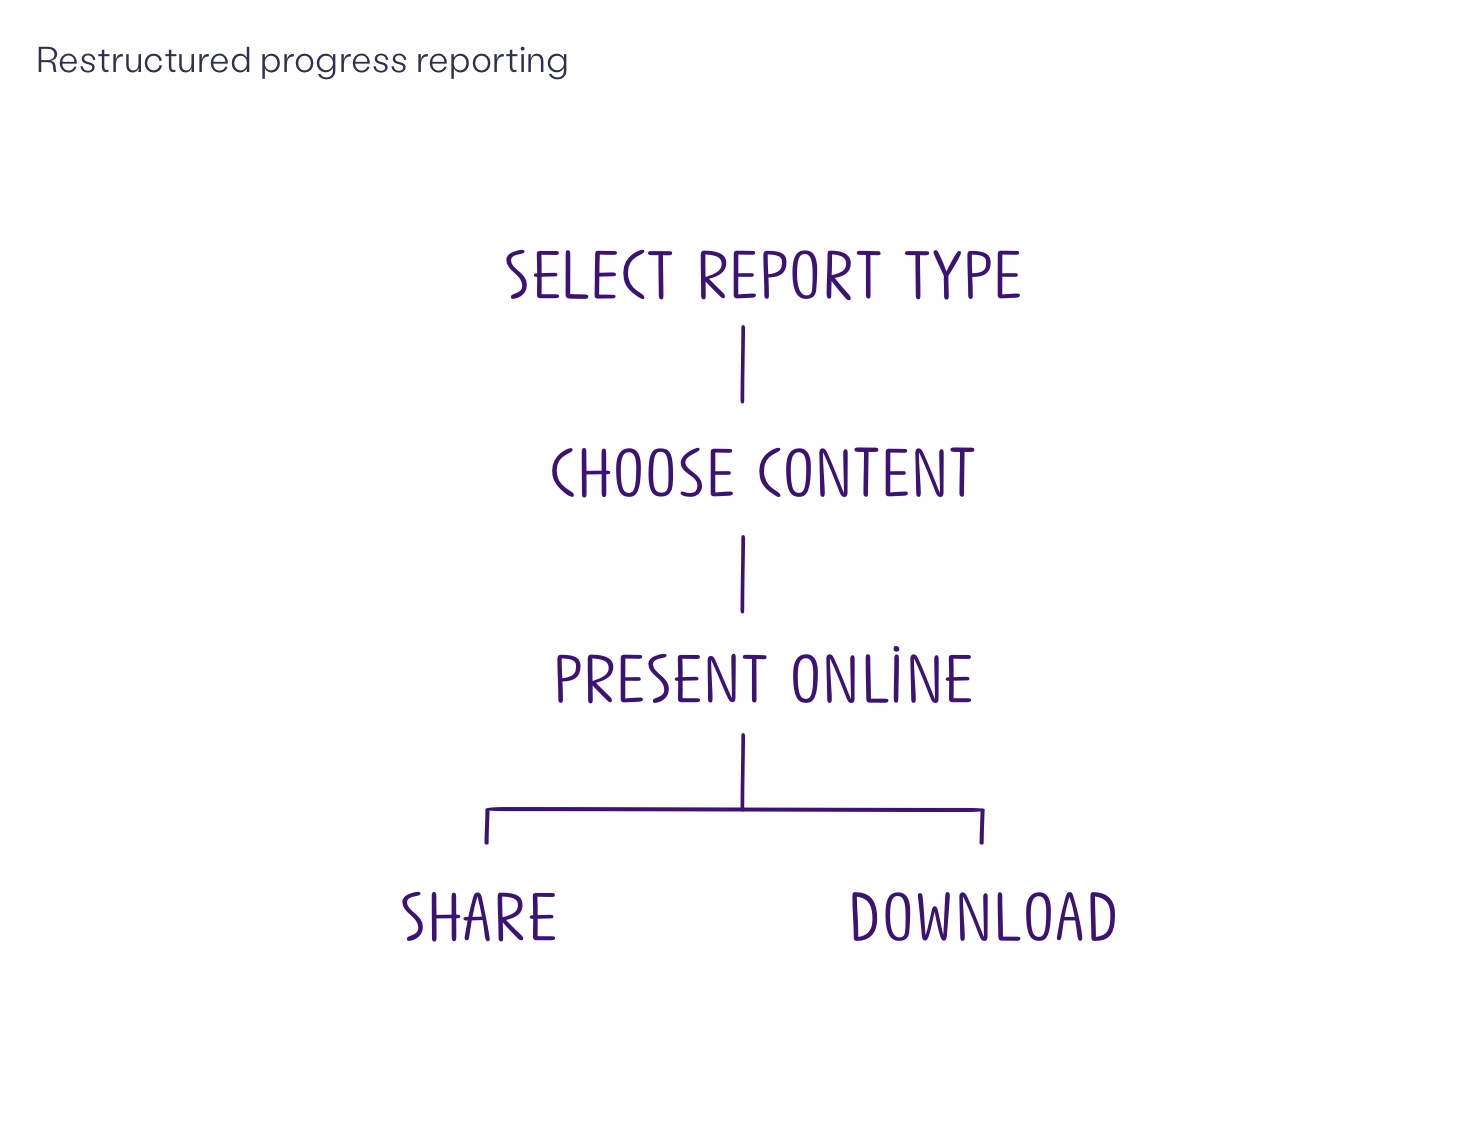 A parent-child infographic in purple displaying the restructured progress reporting.